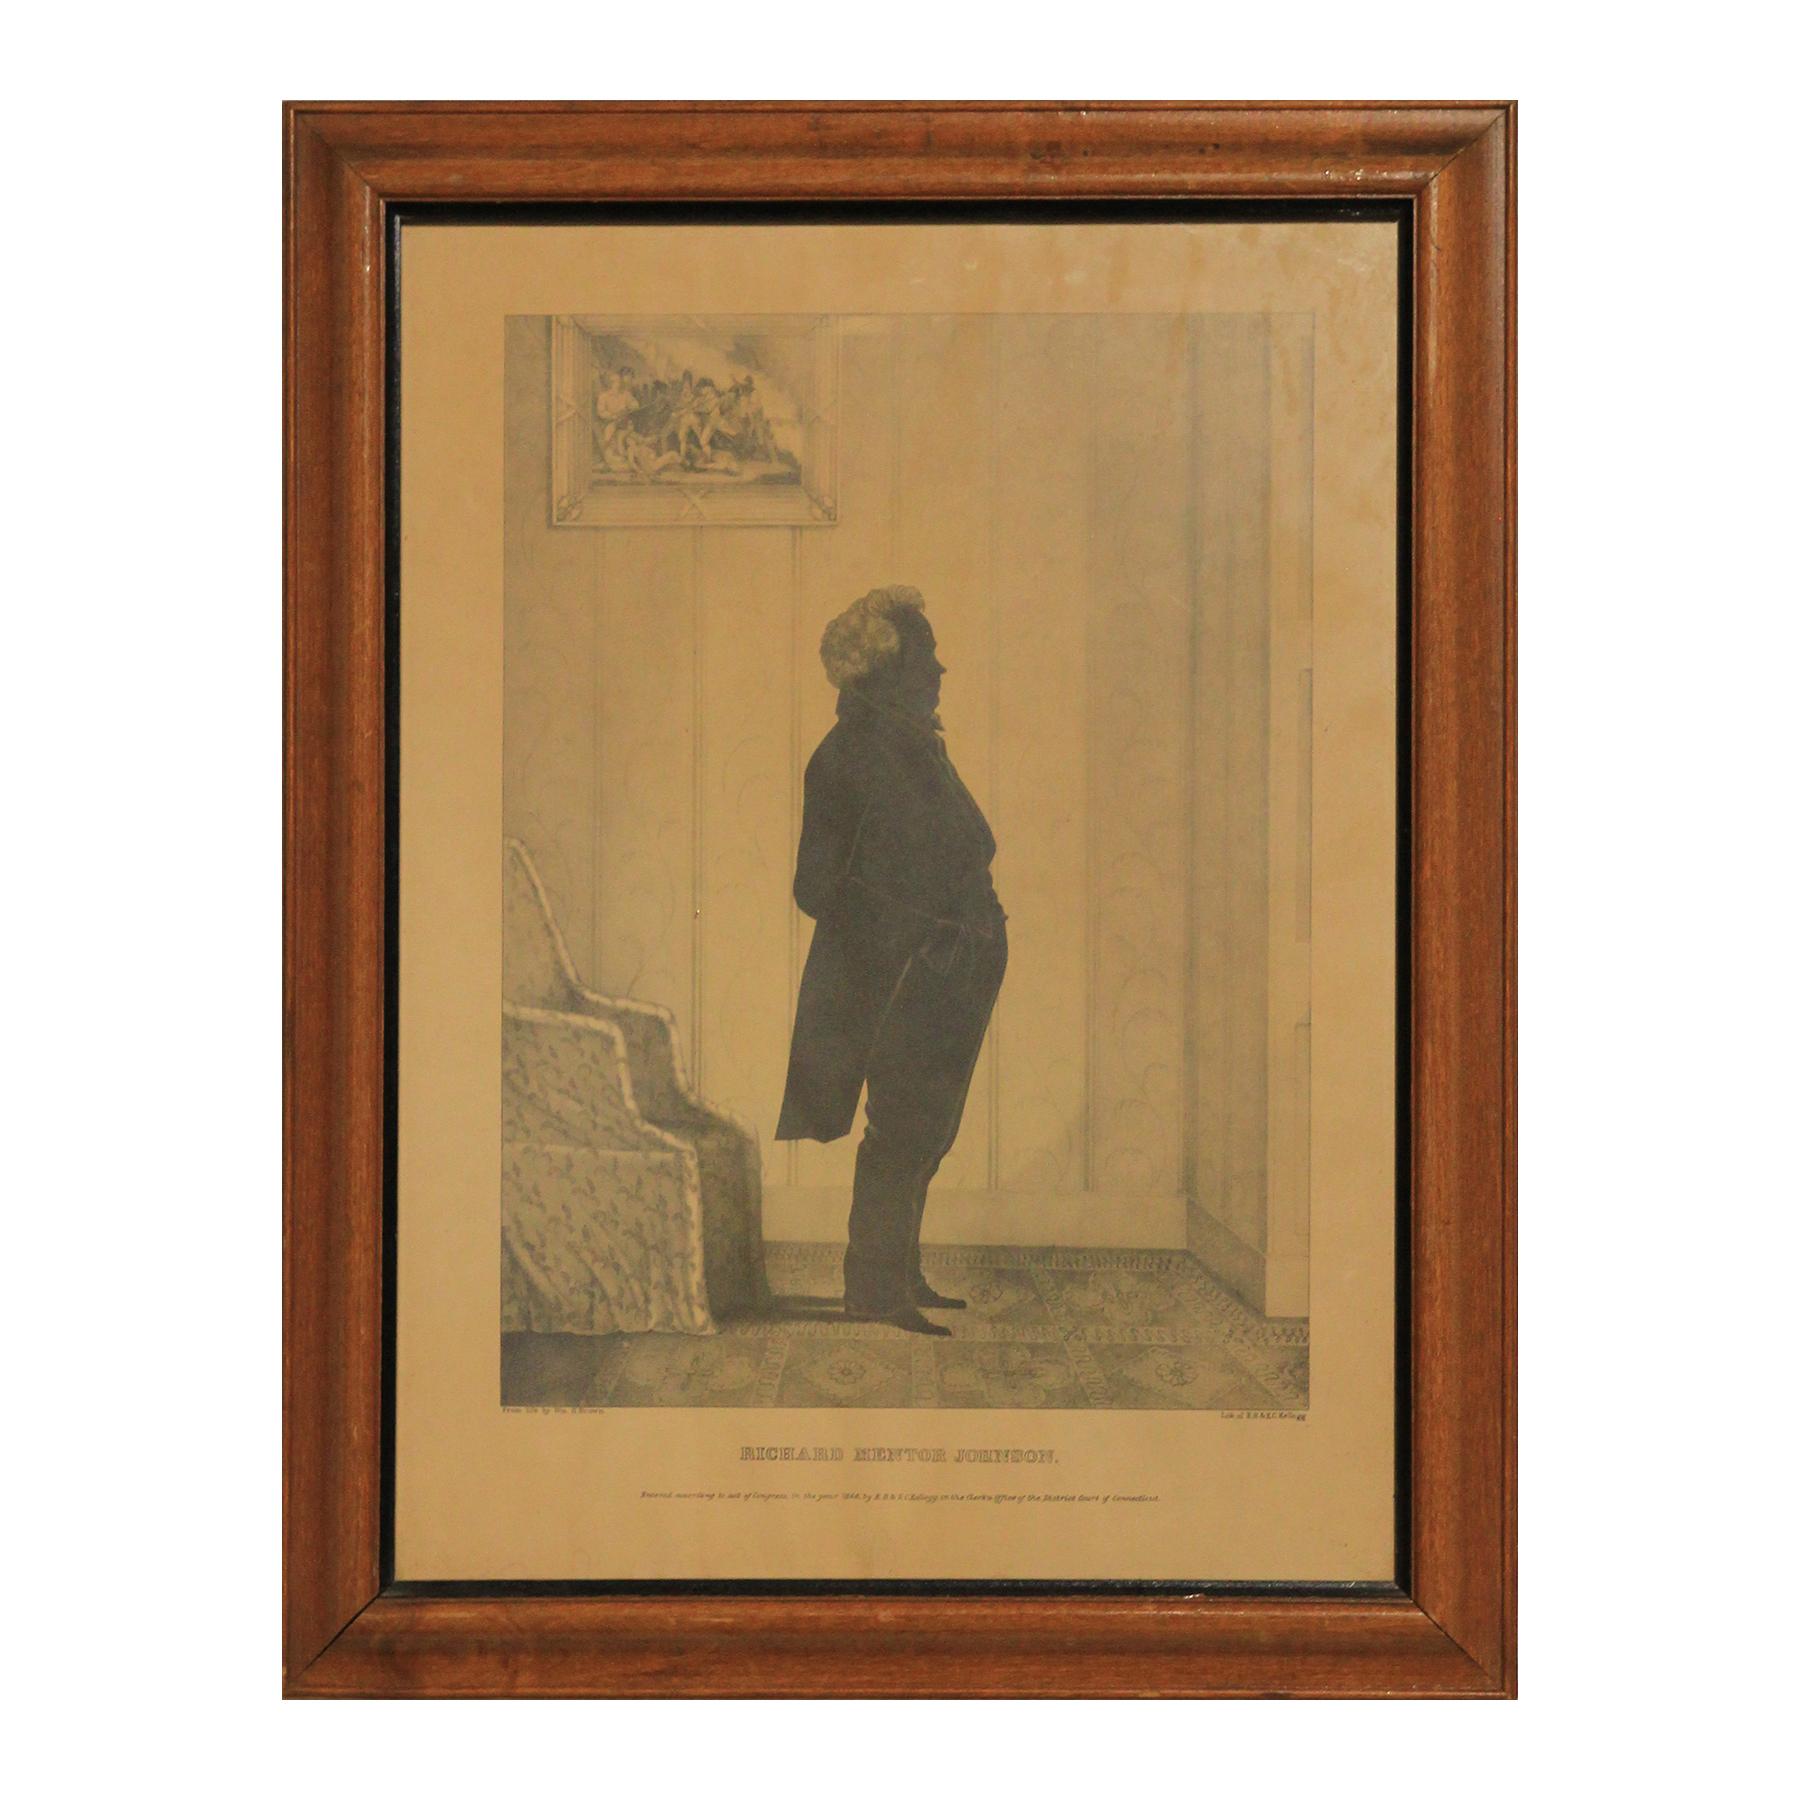 Unknown Figurative Print - Early 19th Century Richard Mentor Johnson Lithograph by E.B. and E.C. Kellogg